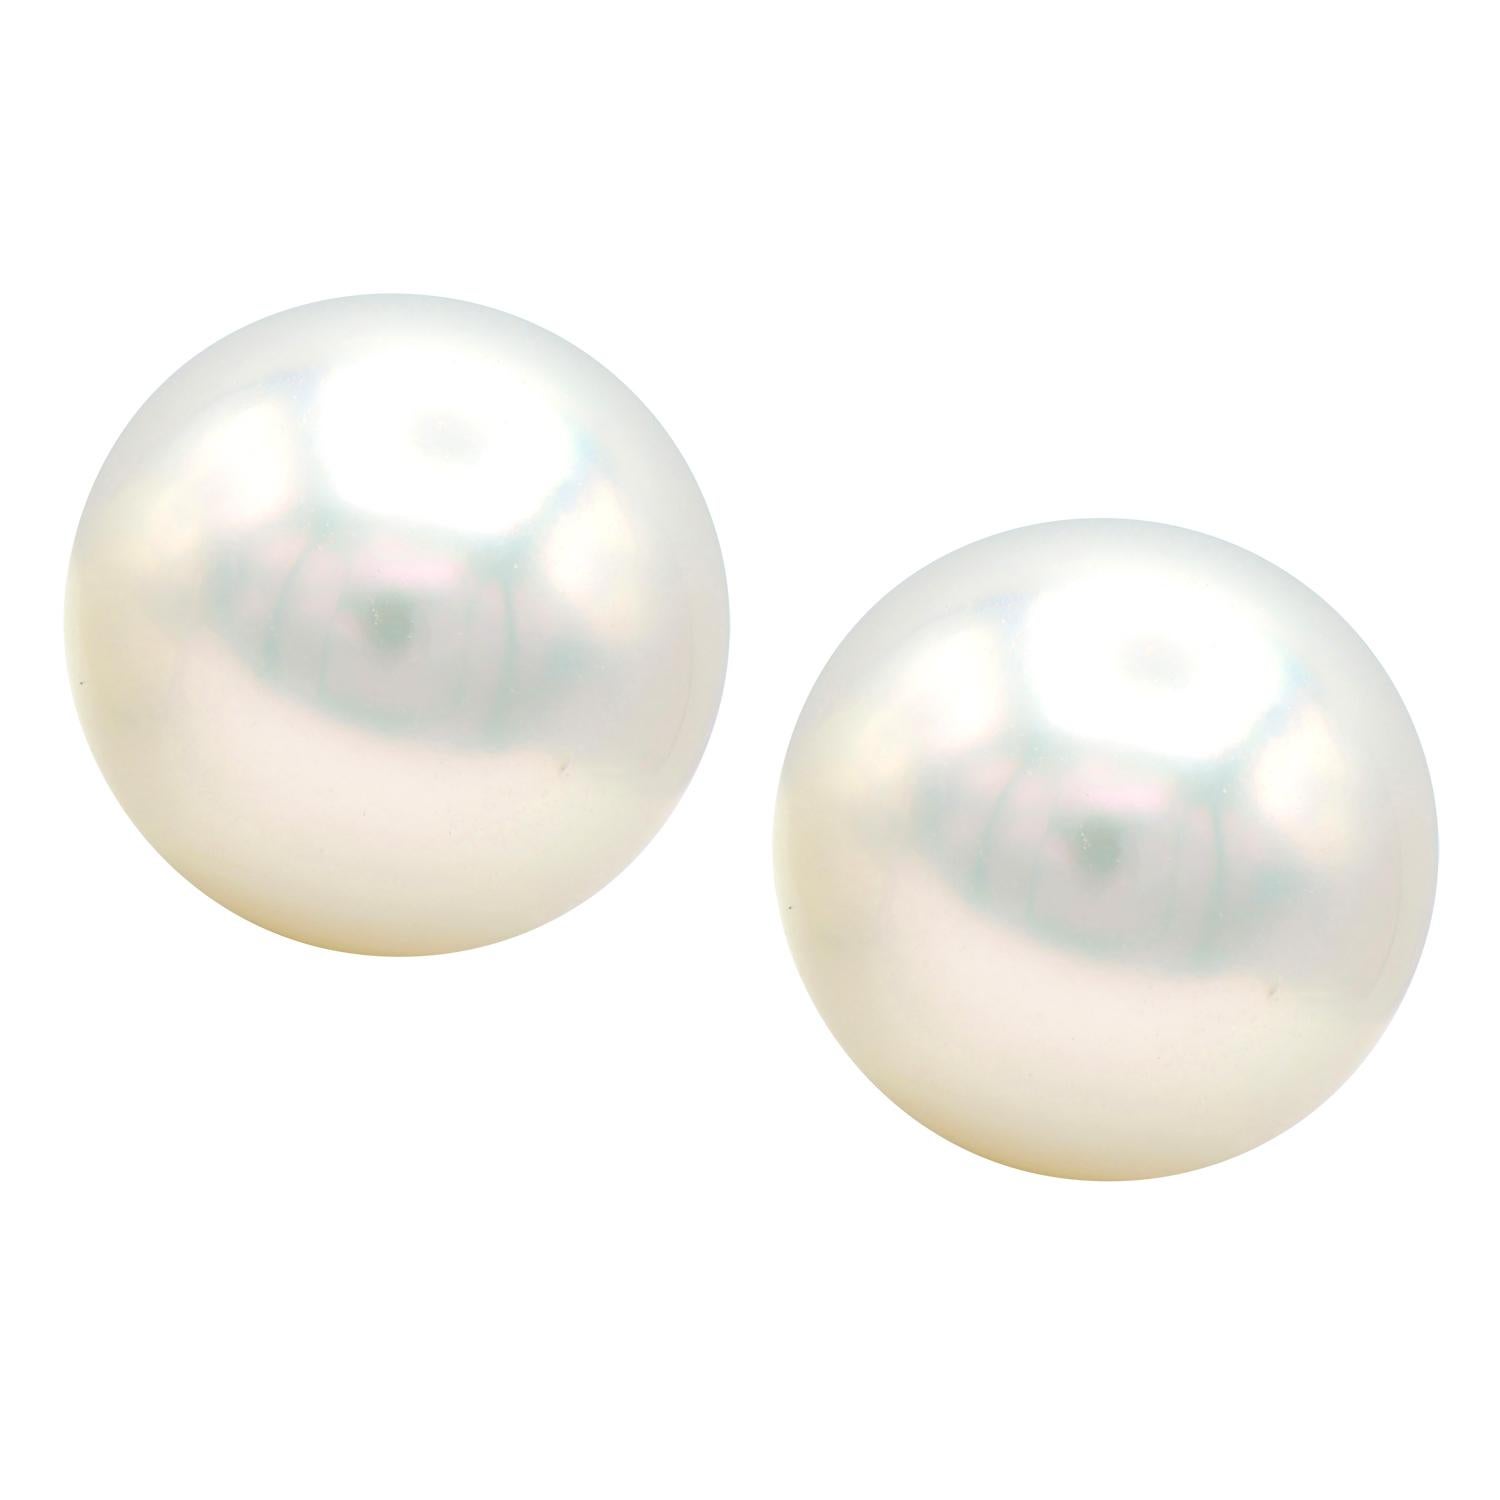 Freshwater Pearl Stud Earrings are a classic and timeless piece of jewelry that should be owned by everyone. Freshwater studs are slightly larger than cultured akoya pearl studs for a bigger more sophisticated look. These 9-9.5mm Freshwater Pearl